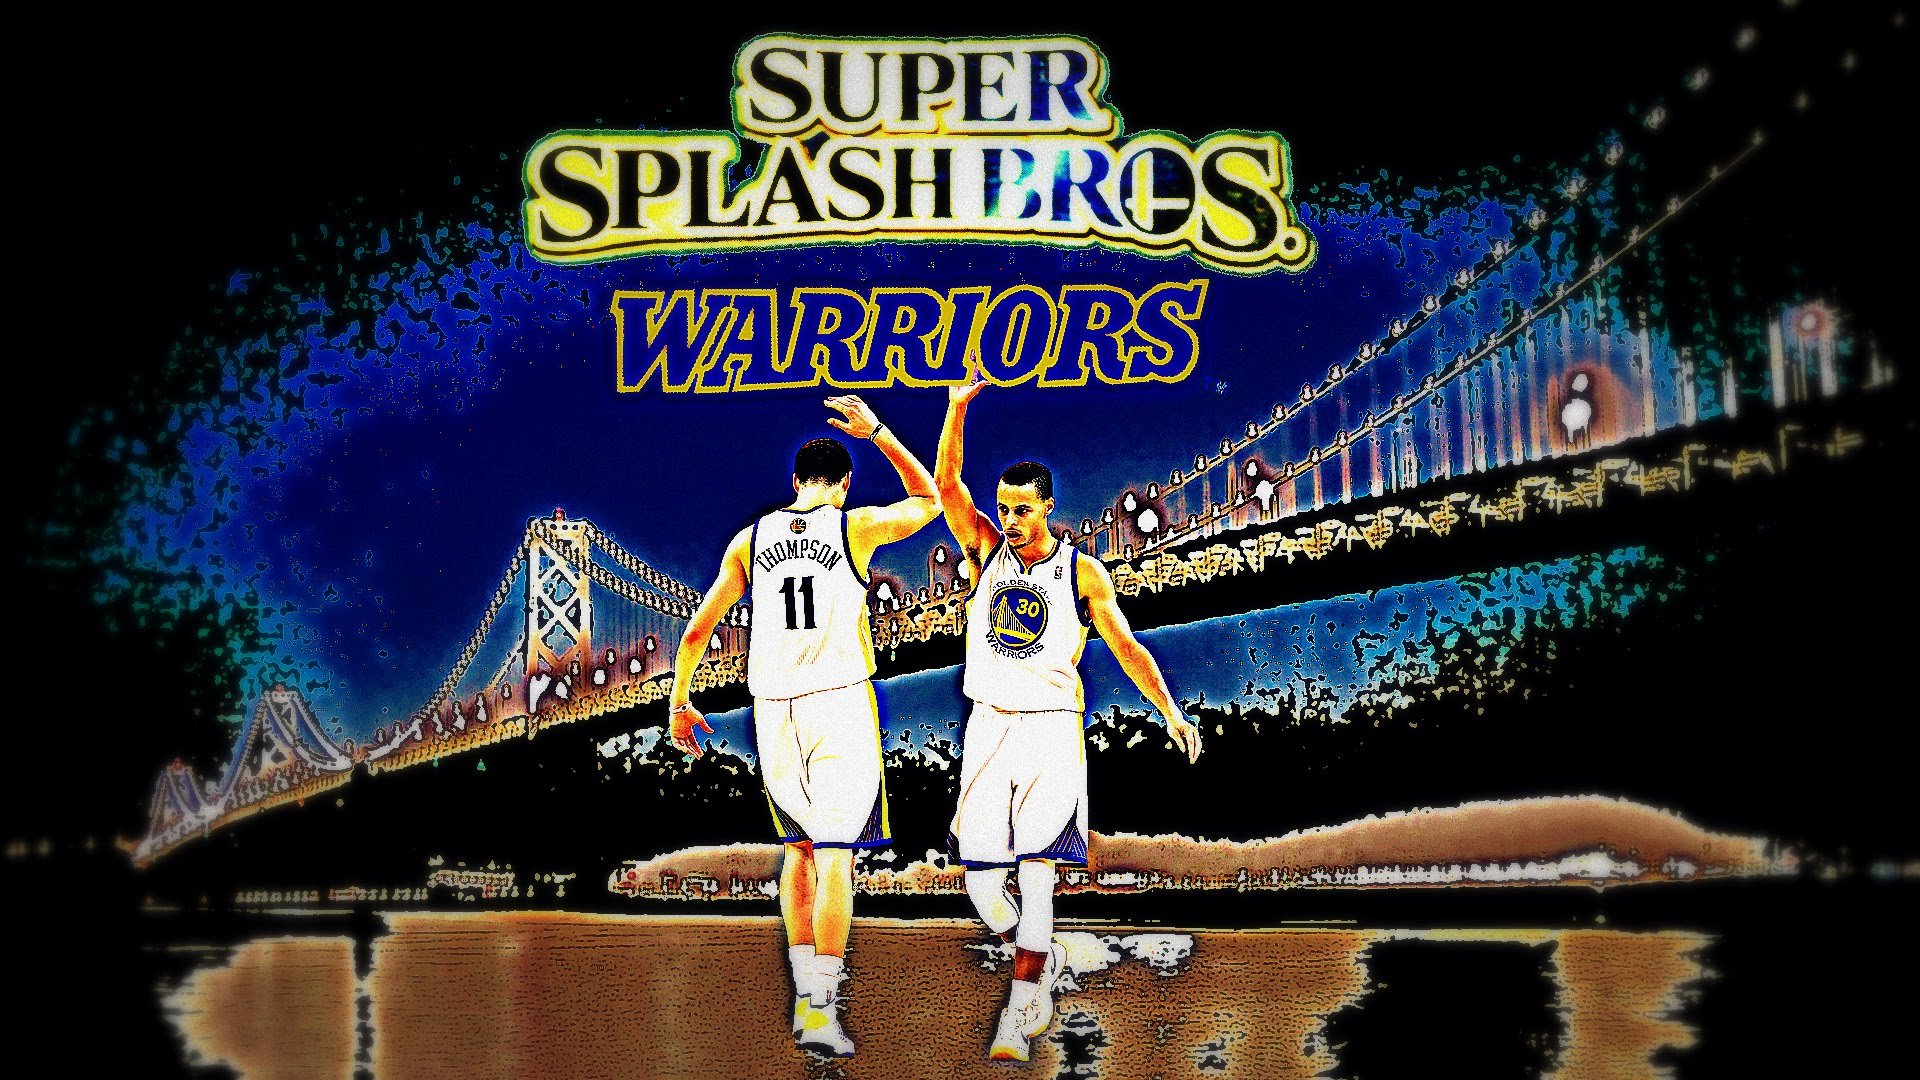 Stephen Curry Klay Thompson Splash Brothers Golden State Warriors Basketball Limited Print Photo Poster 11x17, Sports & Outdoors